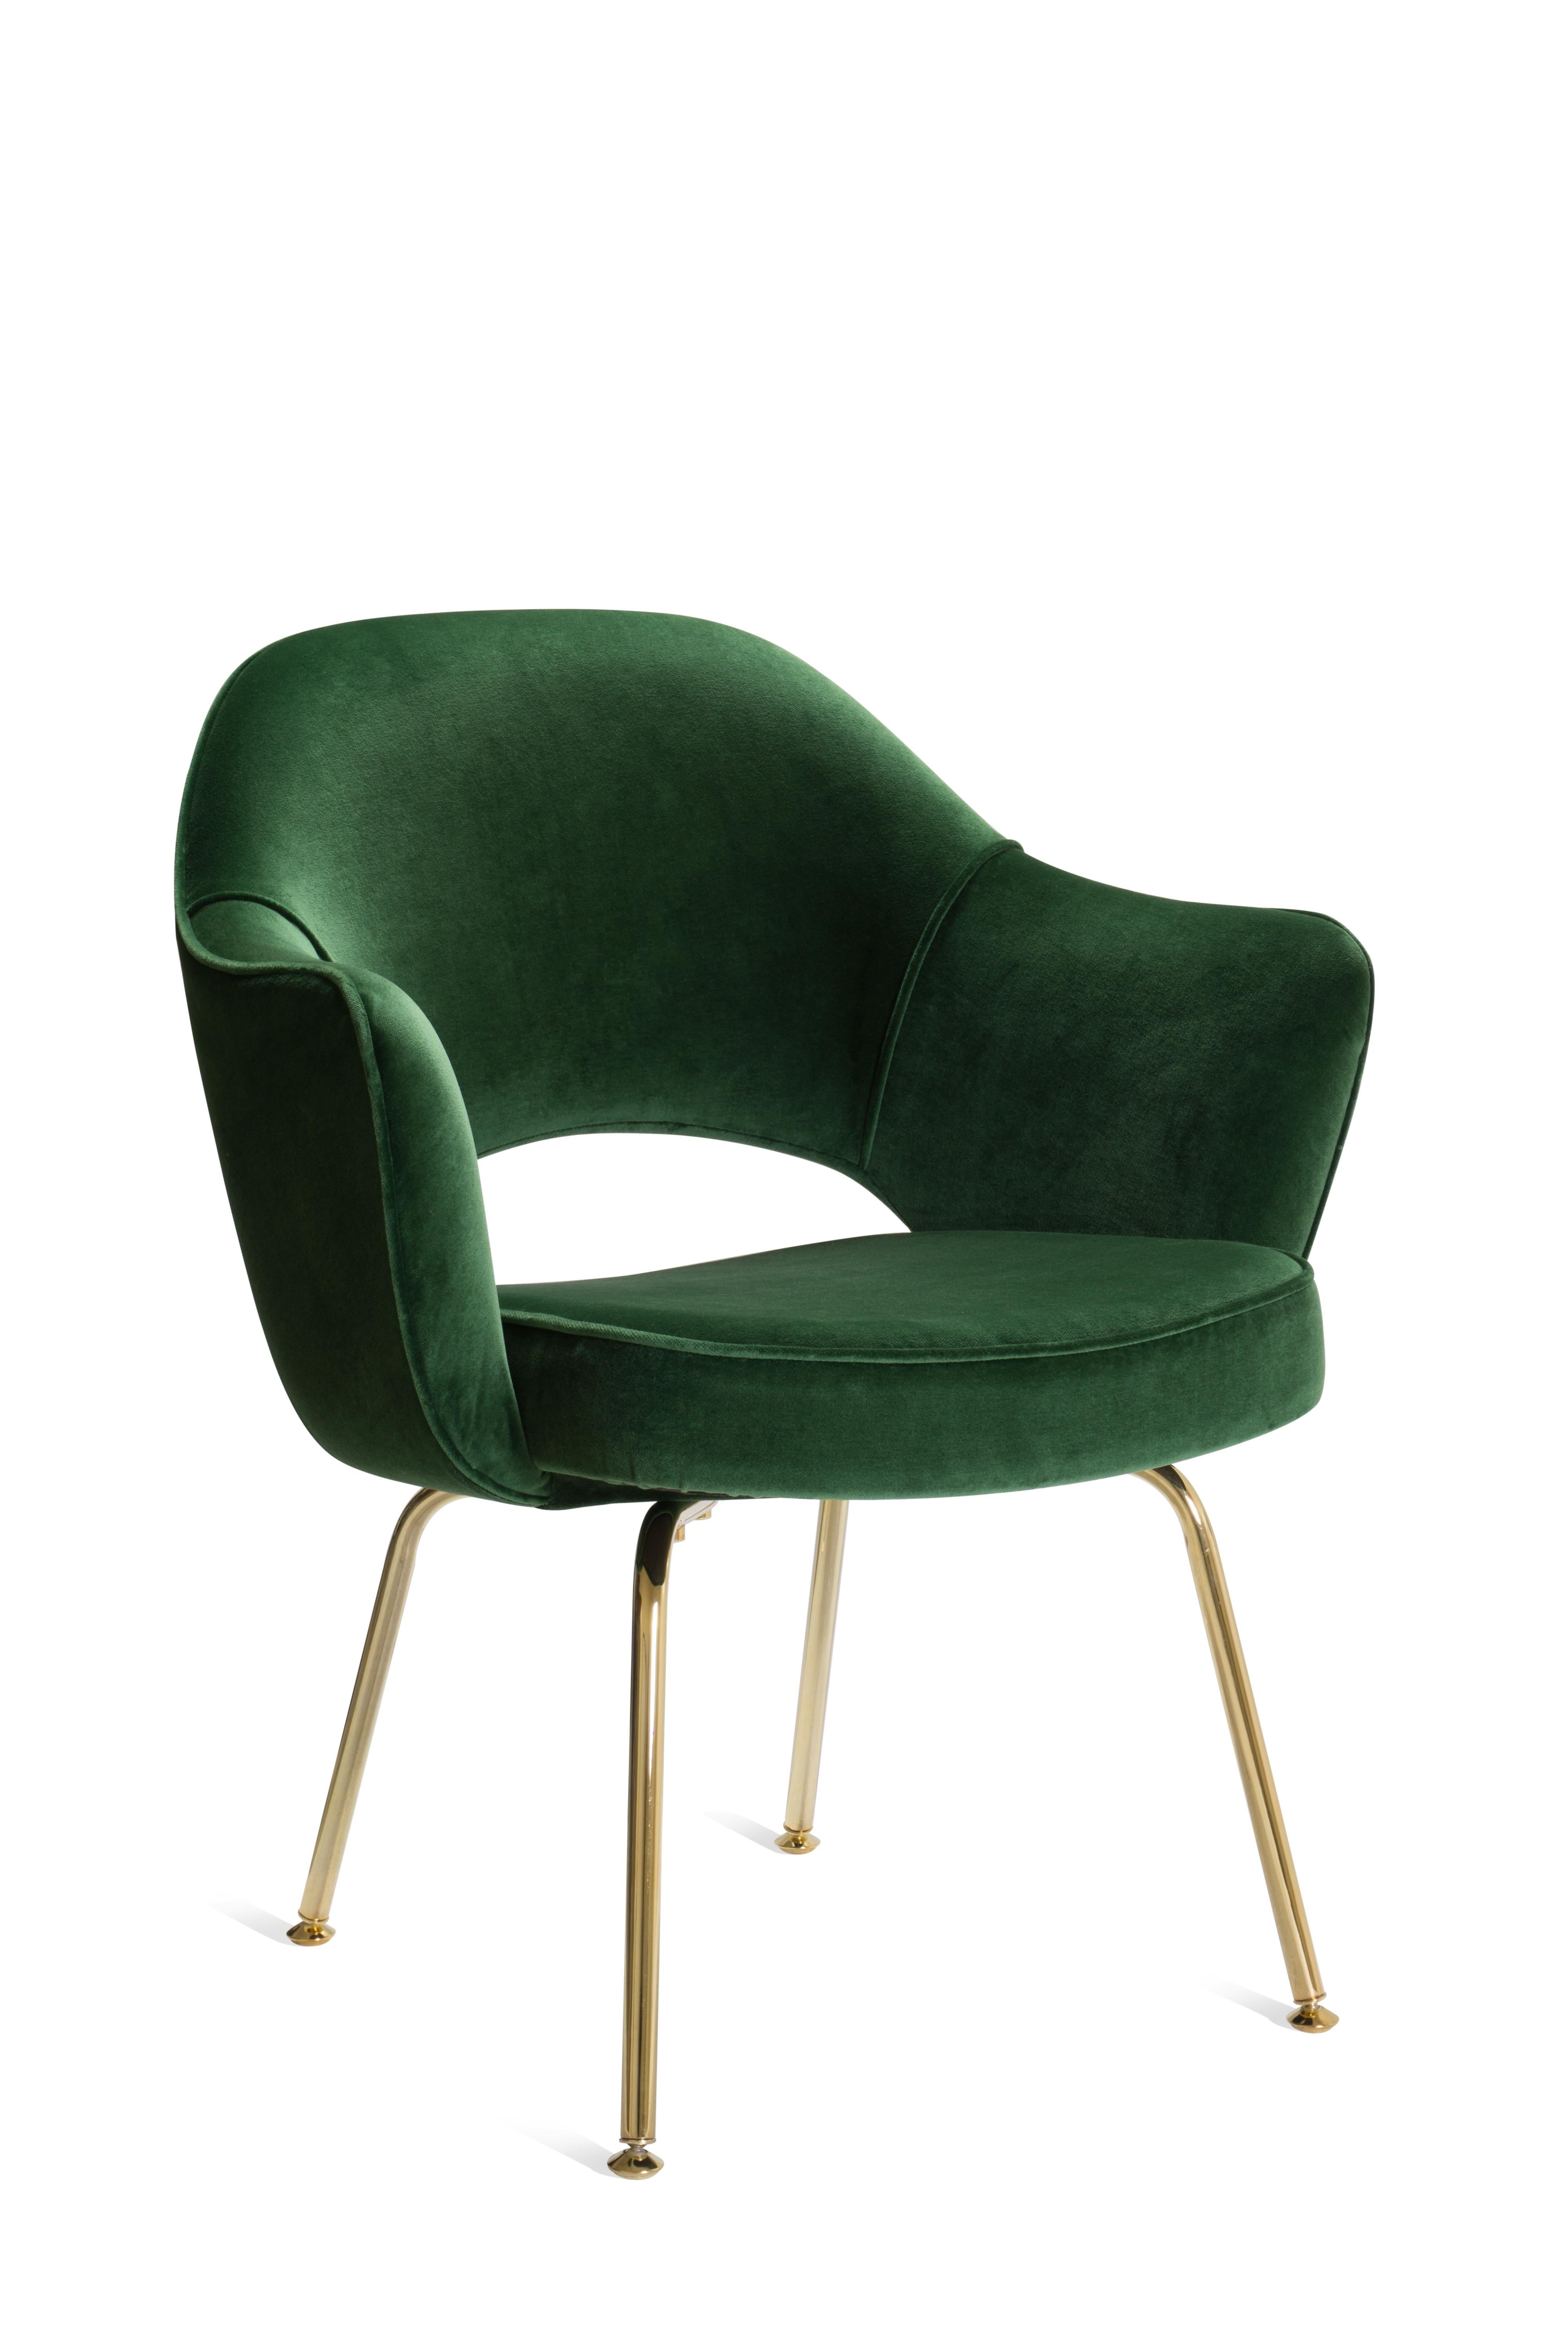 American Saarinen Executive Arm Chairs in Emerald Velvet, Gold Edition, Set of 6 For Sale